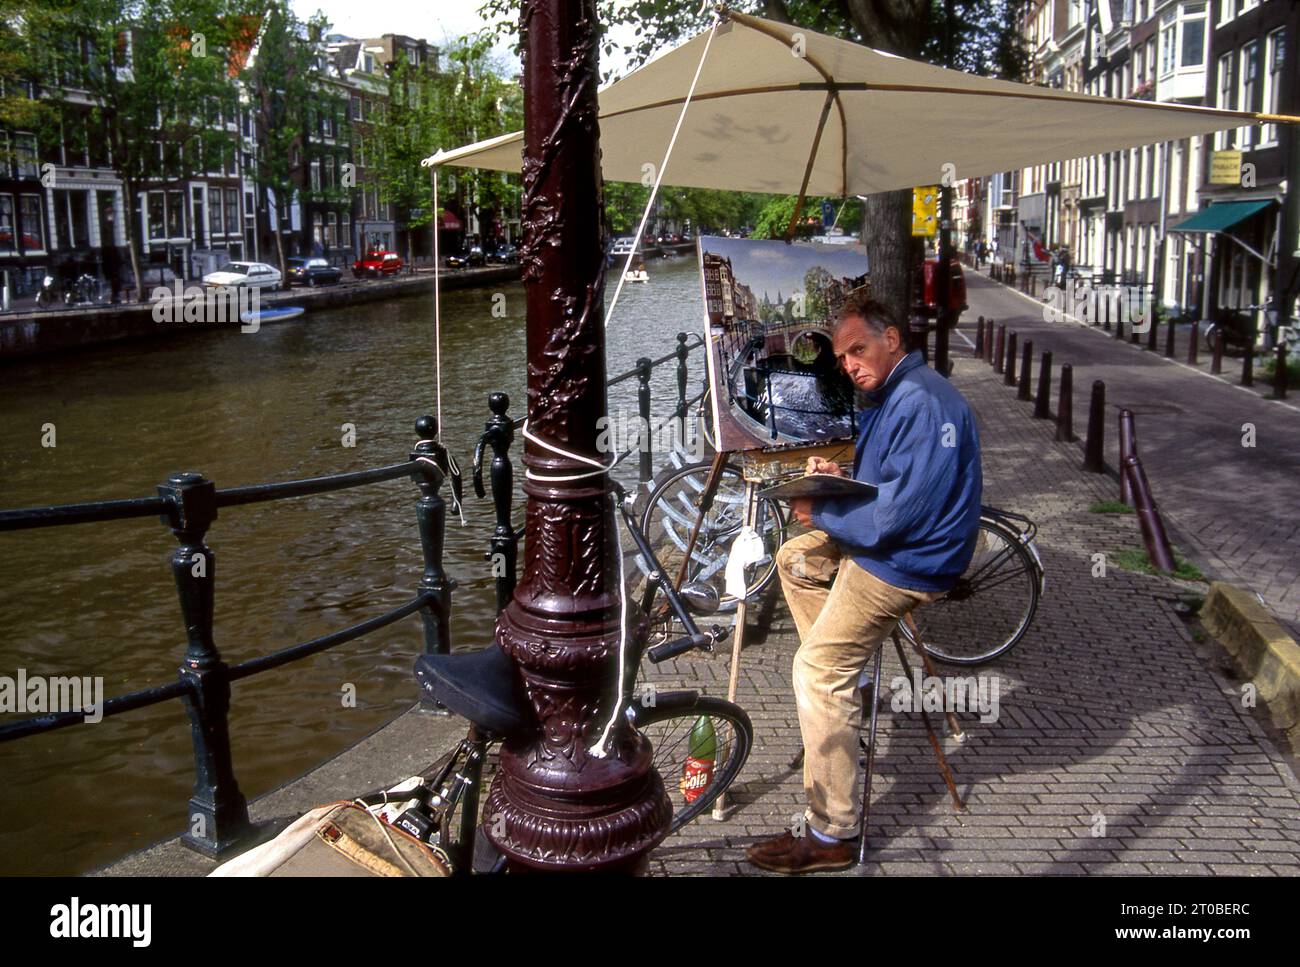 Artist with canvas on easel and umbrella making a painting along the canals in Amsterdam, Holland Stock Photo